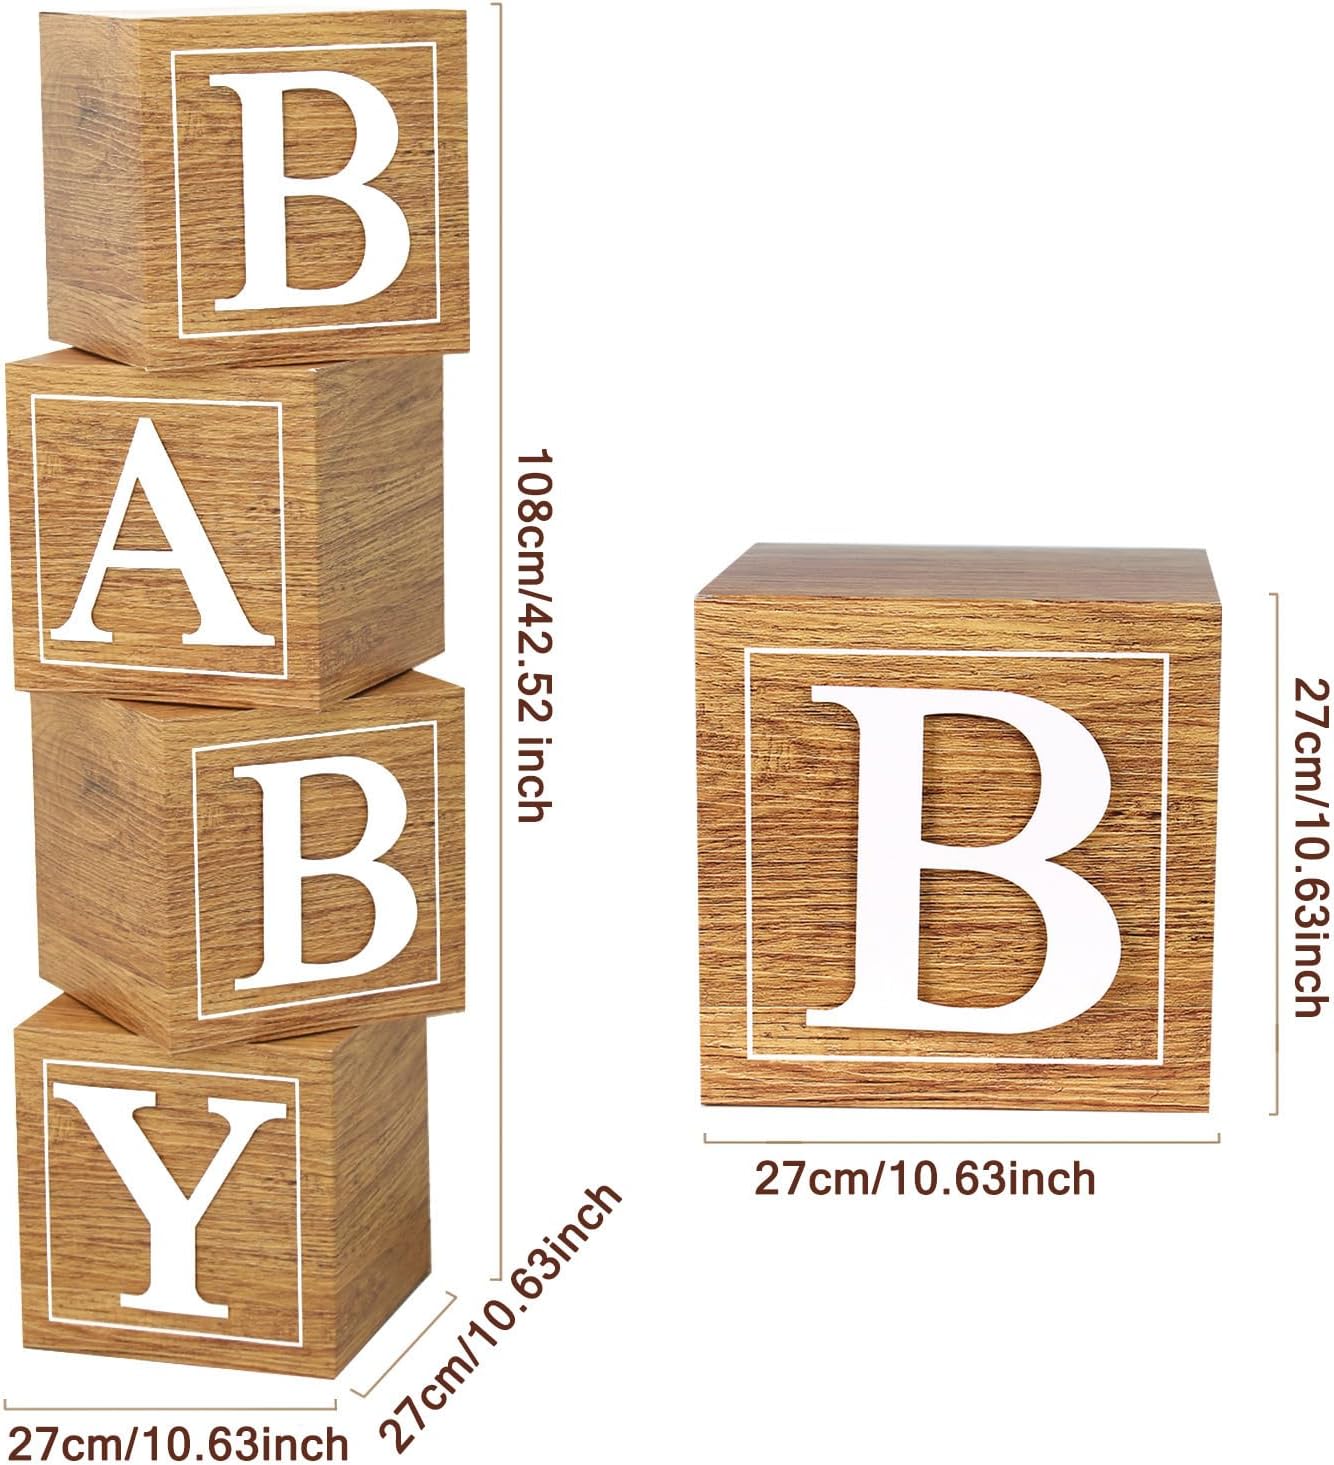 Baby Shower Boxes Birthday Party Decorations - 4 Wood Grain Brown Stereoscopic Blocks with BABY Letter,1st Birthday Balloon Boxes,Teddy Bear Boys Girls Baby Shower Supplies, Gender Reveal Backdrop